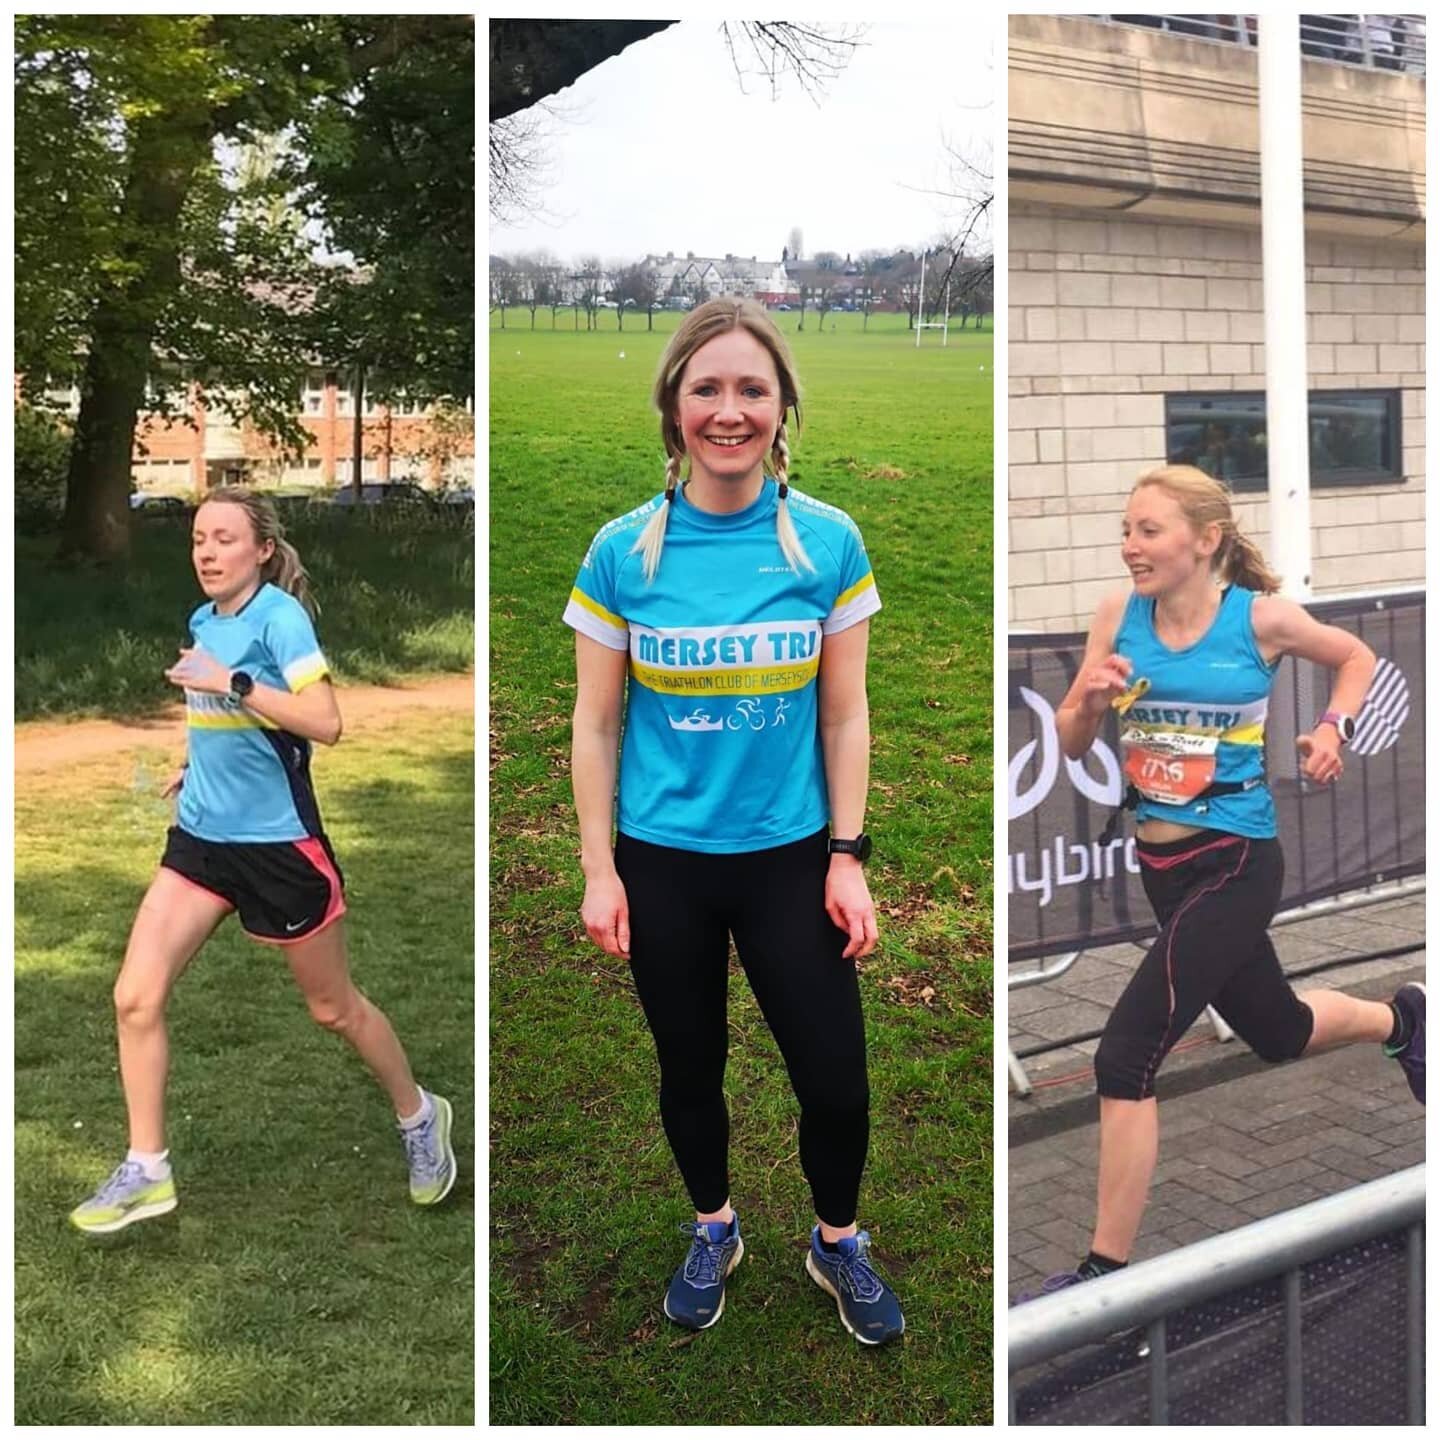 Congratulations to our three fastest female runners! Amazing efforts!

🥇 @lmomahony Lizzie O'Mahony
🥈 @lornamh26  Lorna Harper
🥉 Helen Skipper

We can't wait to see what you've got in you for the rest of the year!